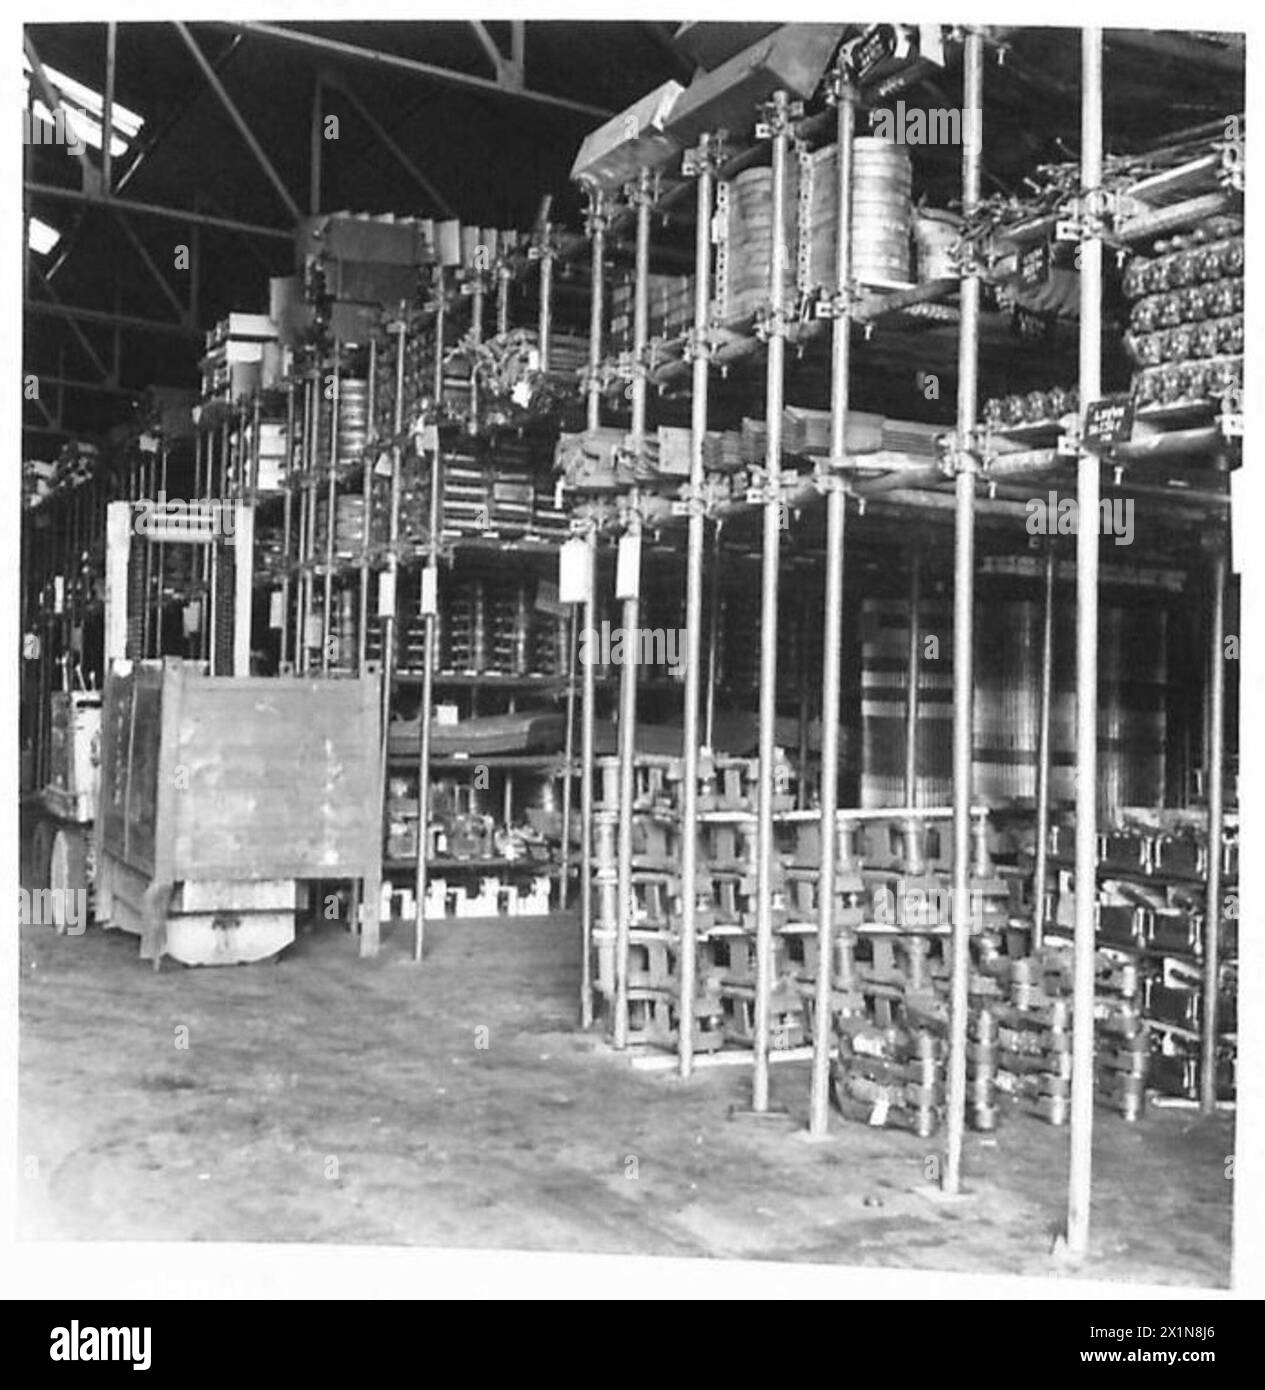 VARIOUS DEPARTMENTS AT CENTRAL ORDNANCE DEPOT, CHILWELL - Bulk Buildings. Showing the new type of tacking for Stores, British Army Stock Photo